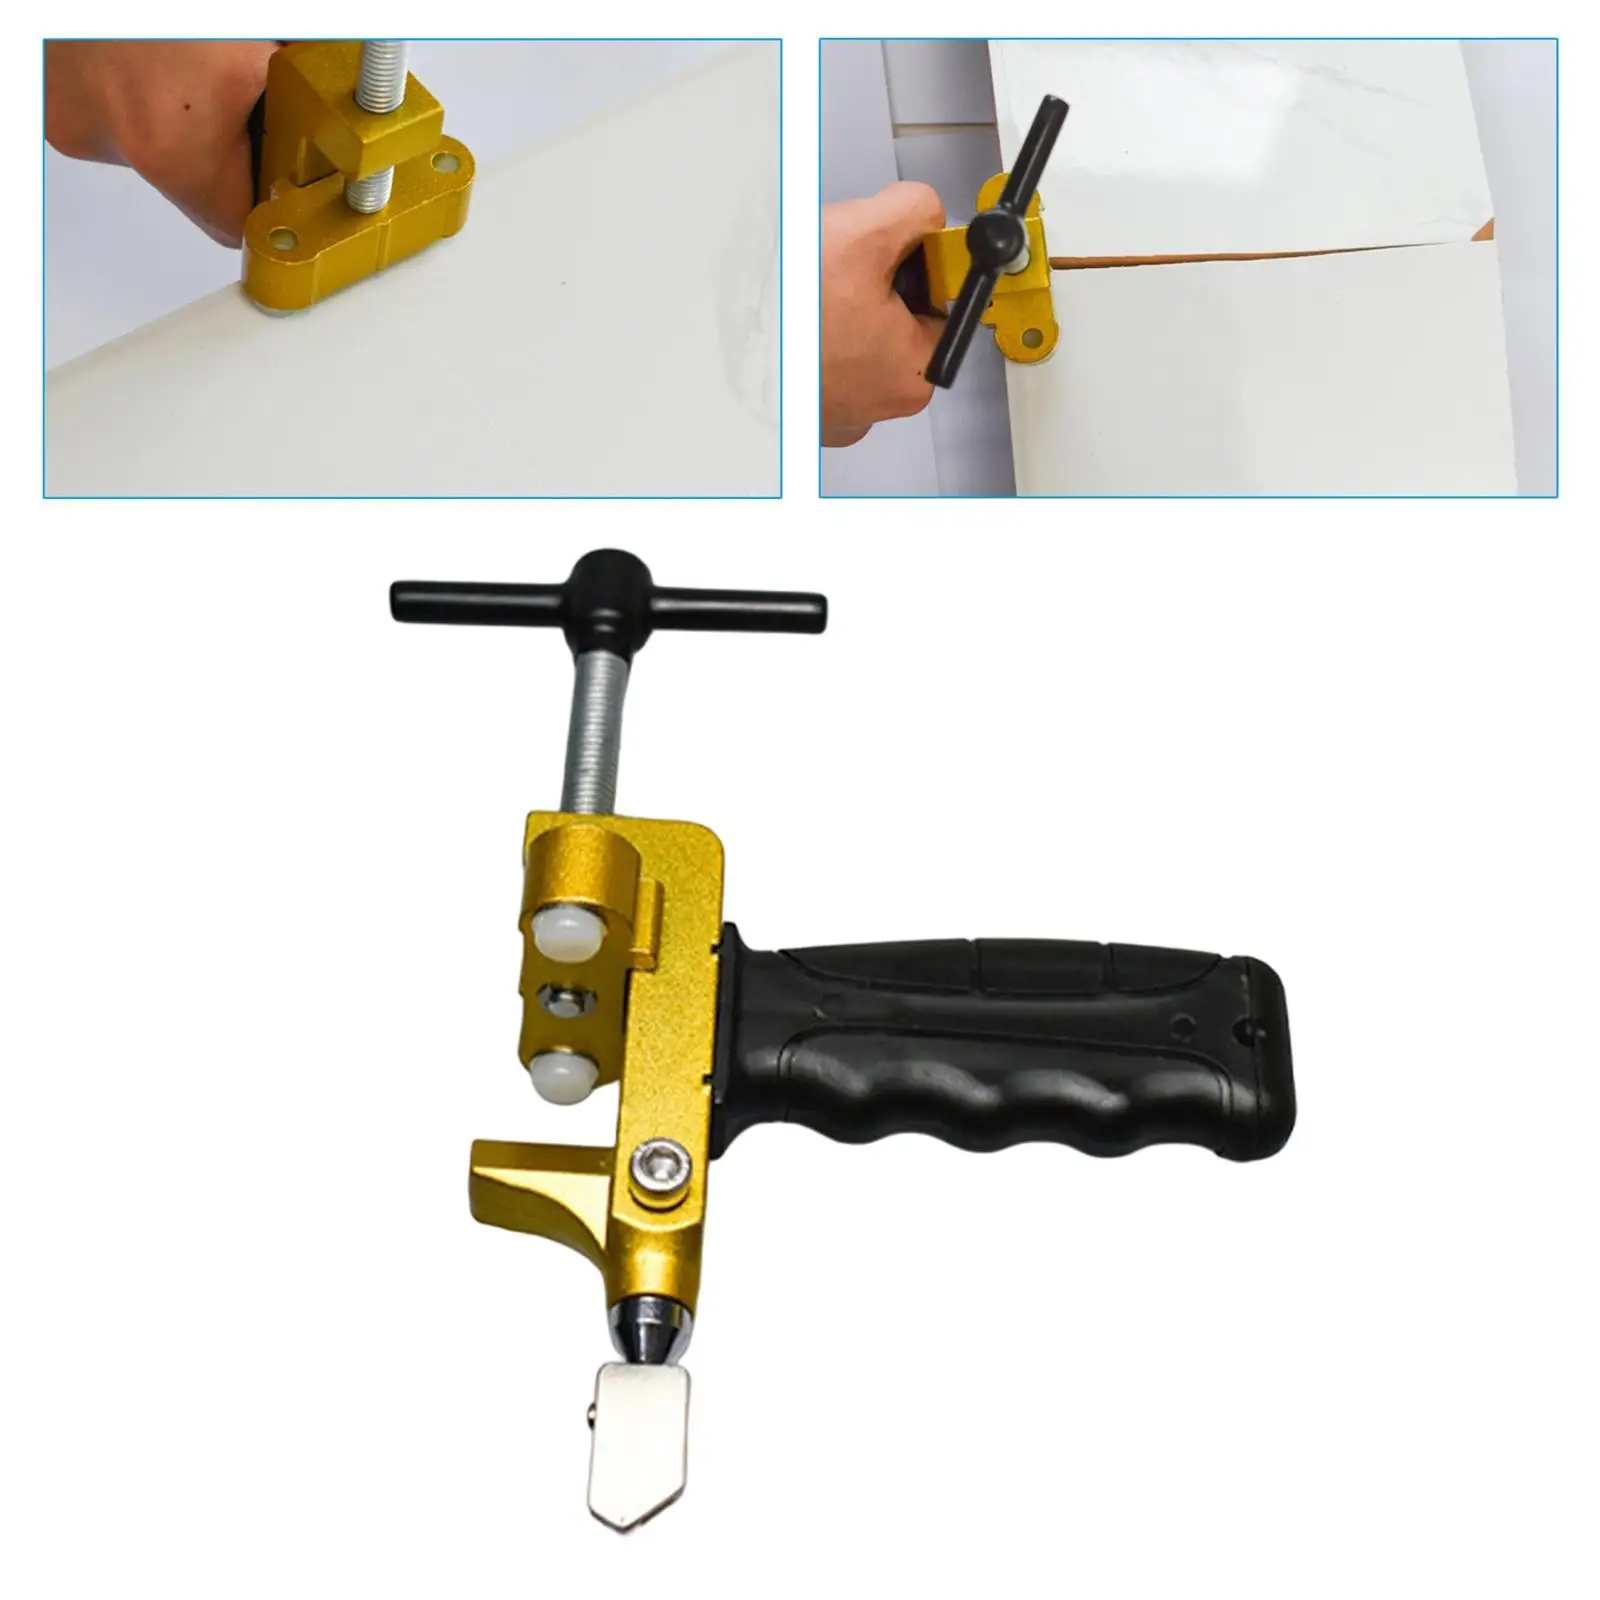 Alloy Tile Glass Cutter Manual Tile Mirrors Cutter Glass Cutting Kit Ceramic Tile Opener Tile Tools Multitools